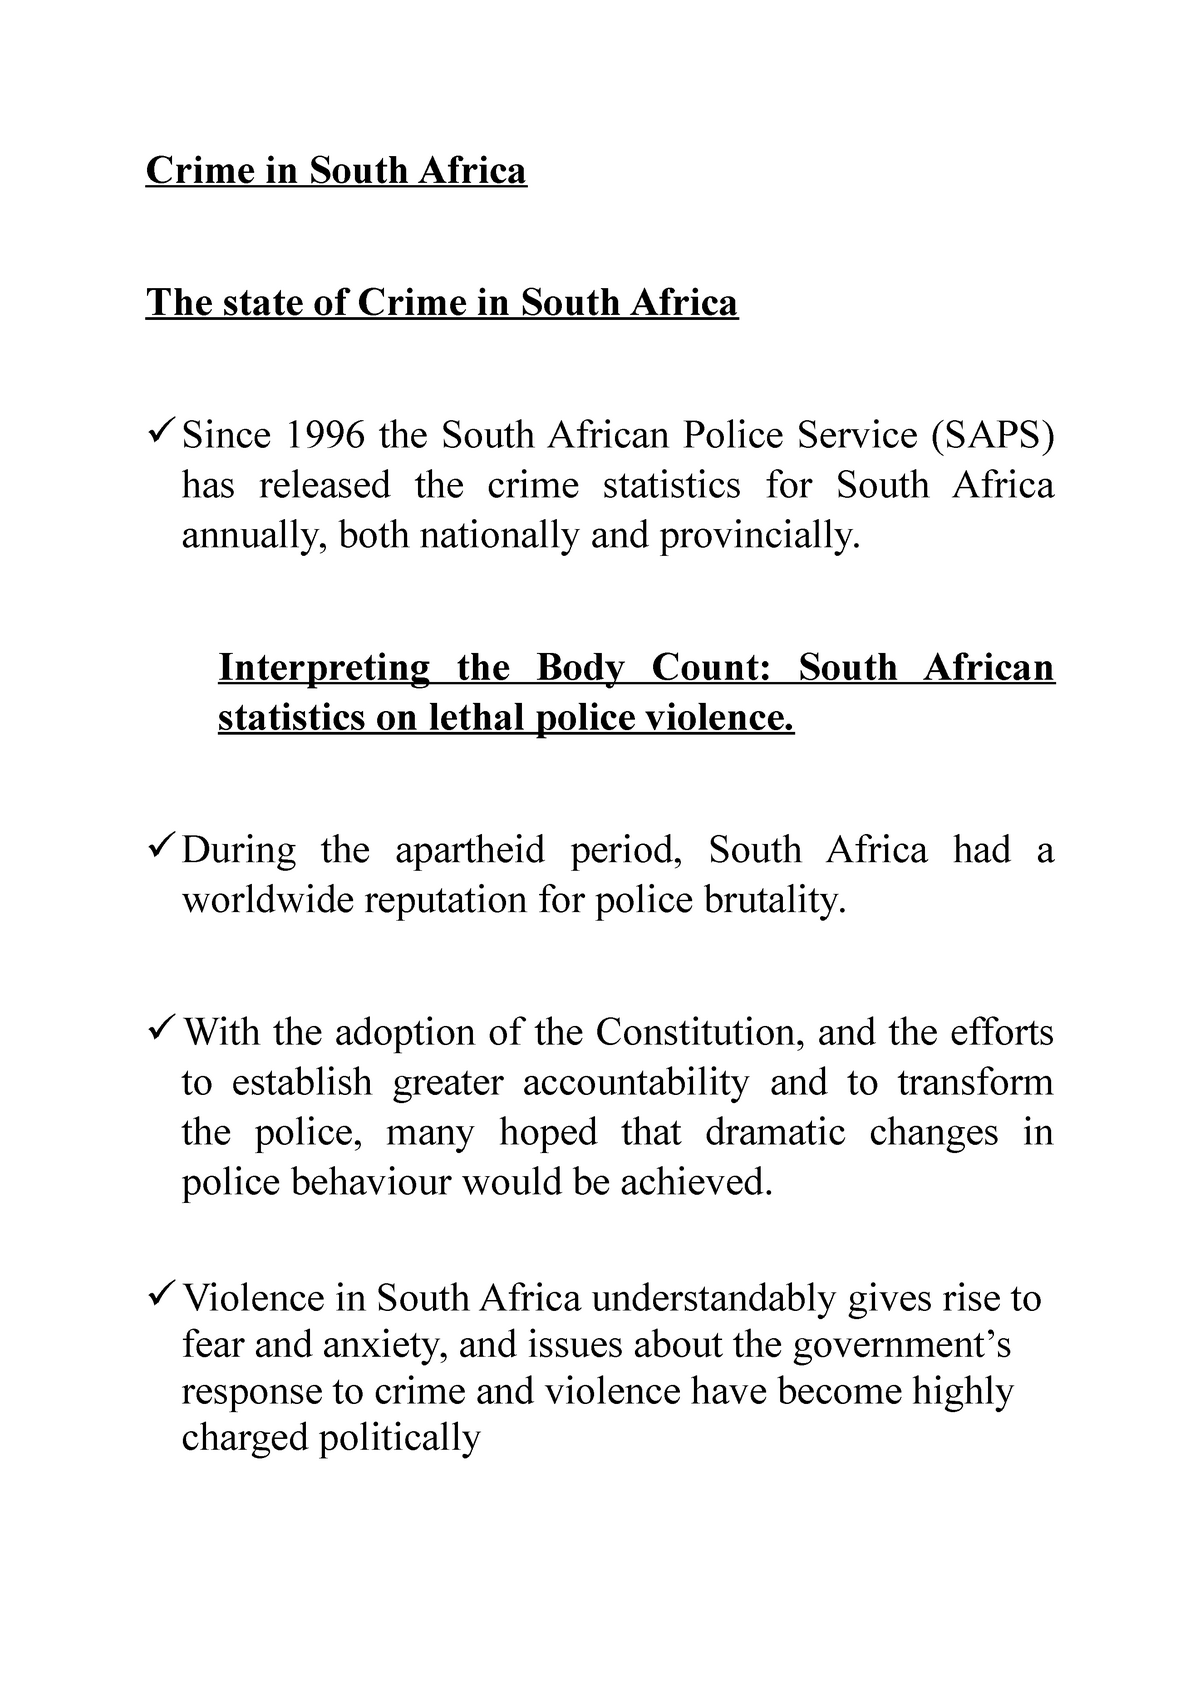 essay about crime rate in south africa